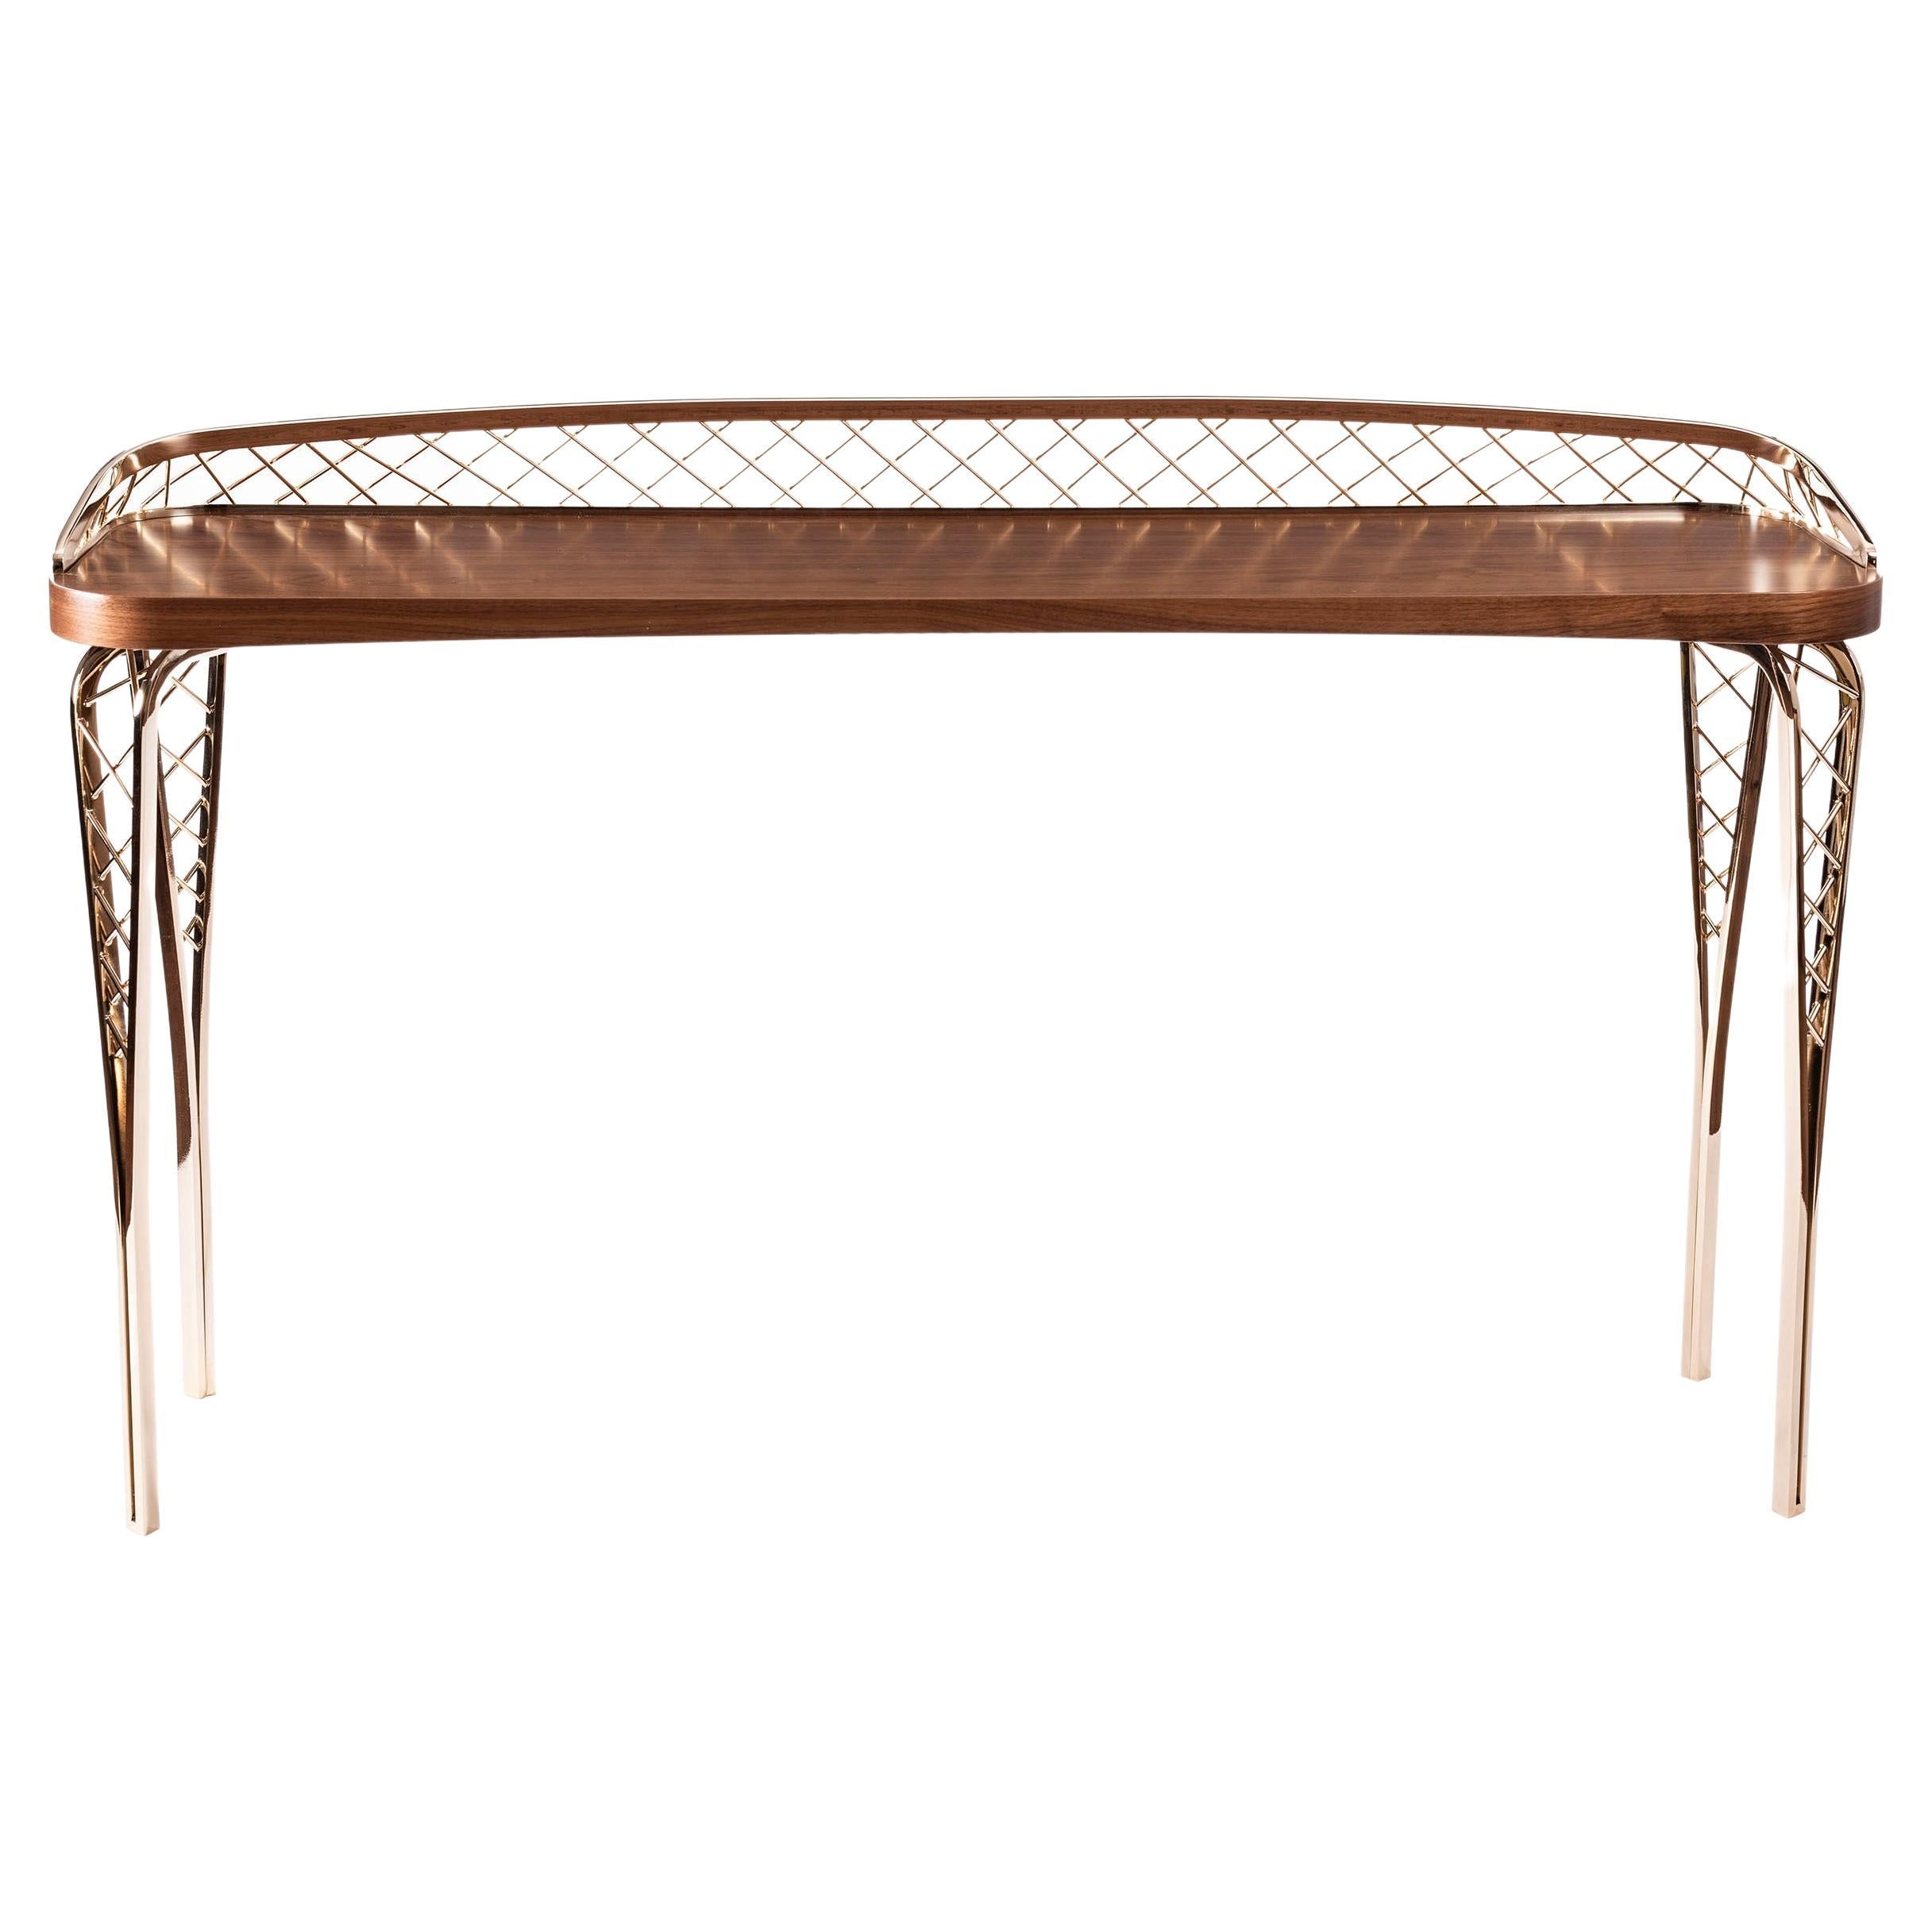 Modern Console Table Wood and Steel by Cyril Rumpler, Gustav